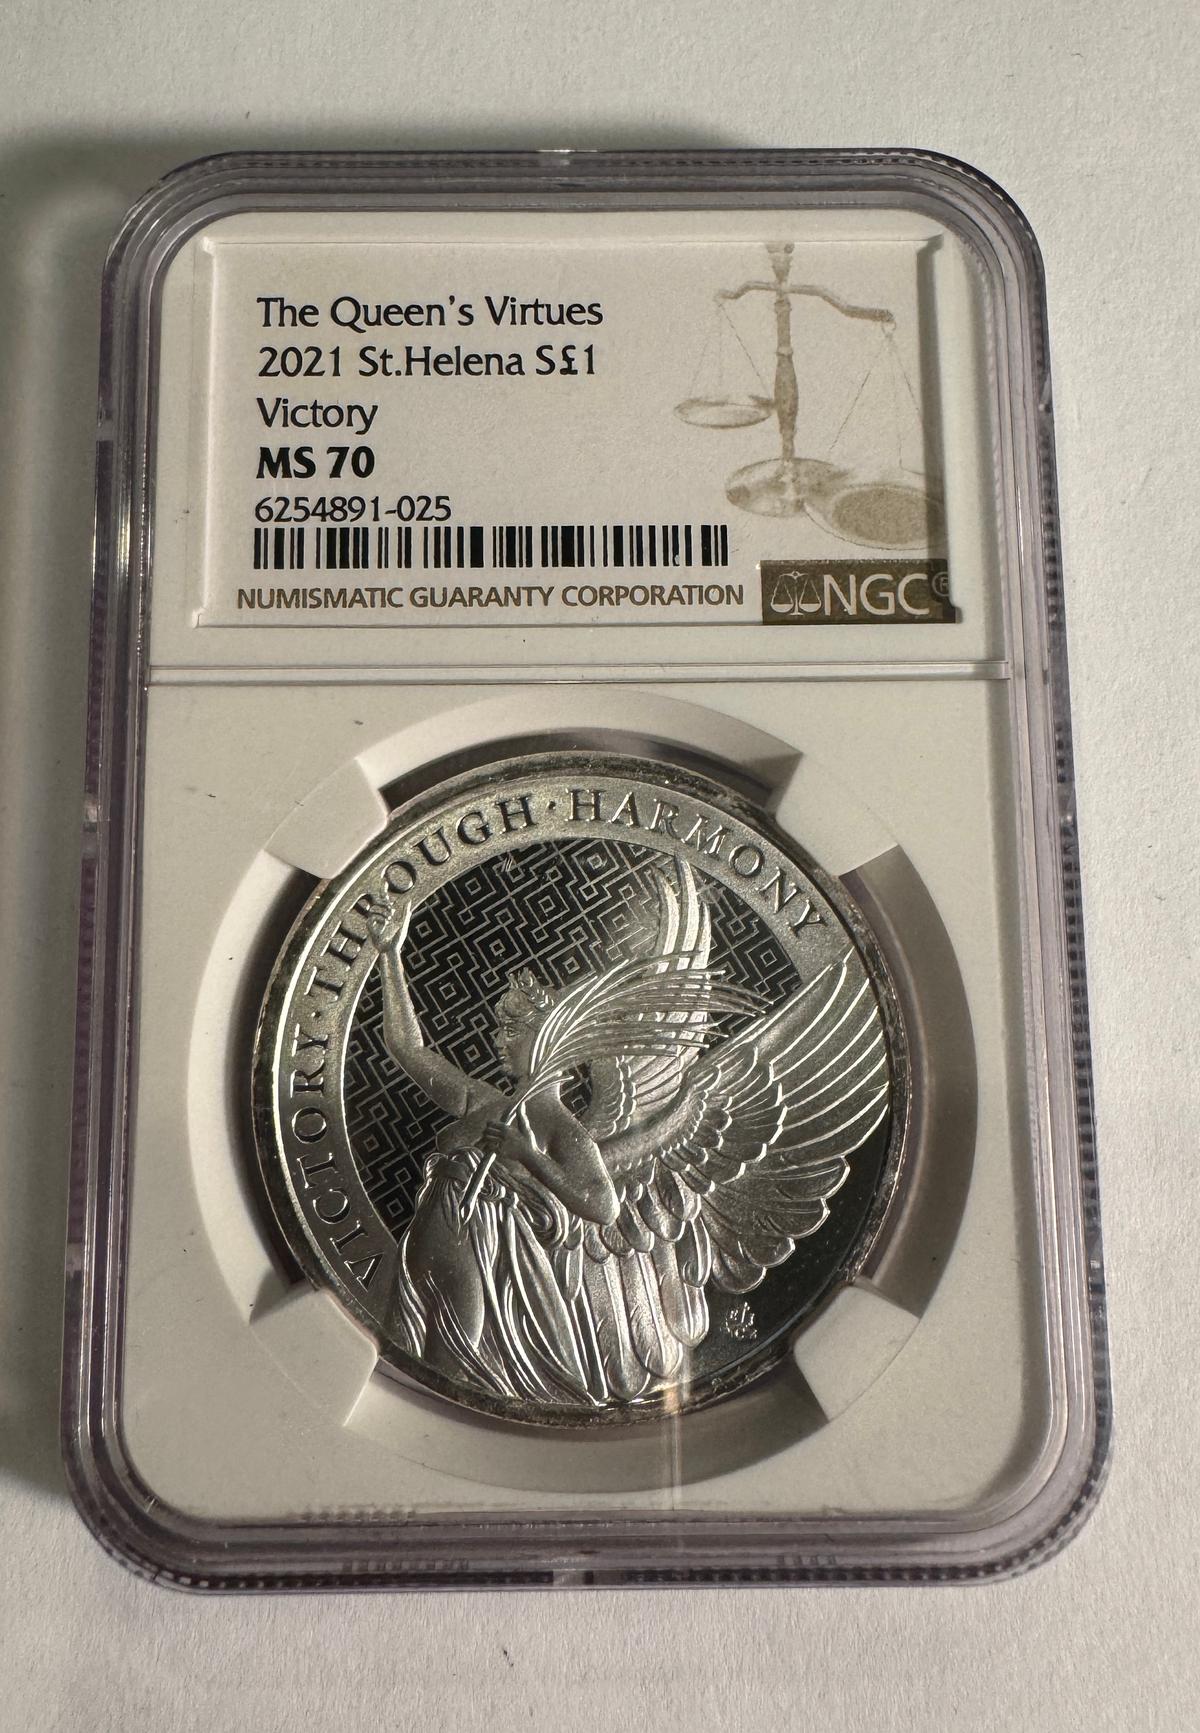 The Queen's Virtues 2021 St.Helena S£1 Victory MS70